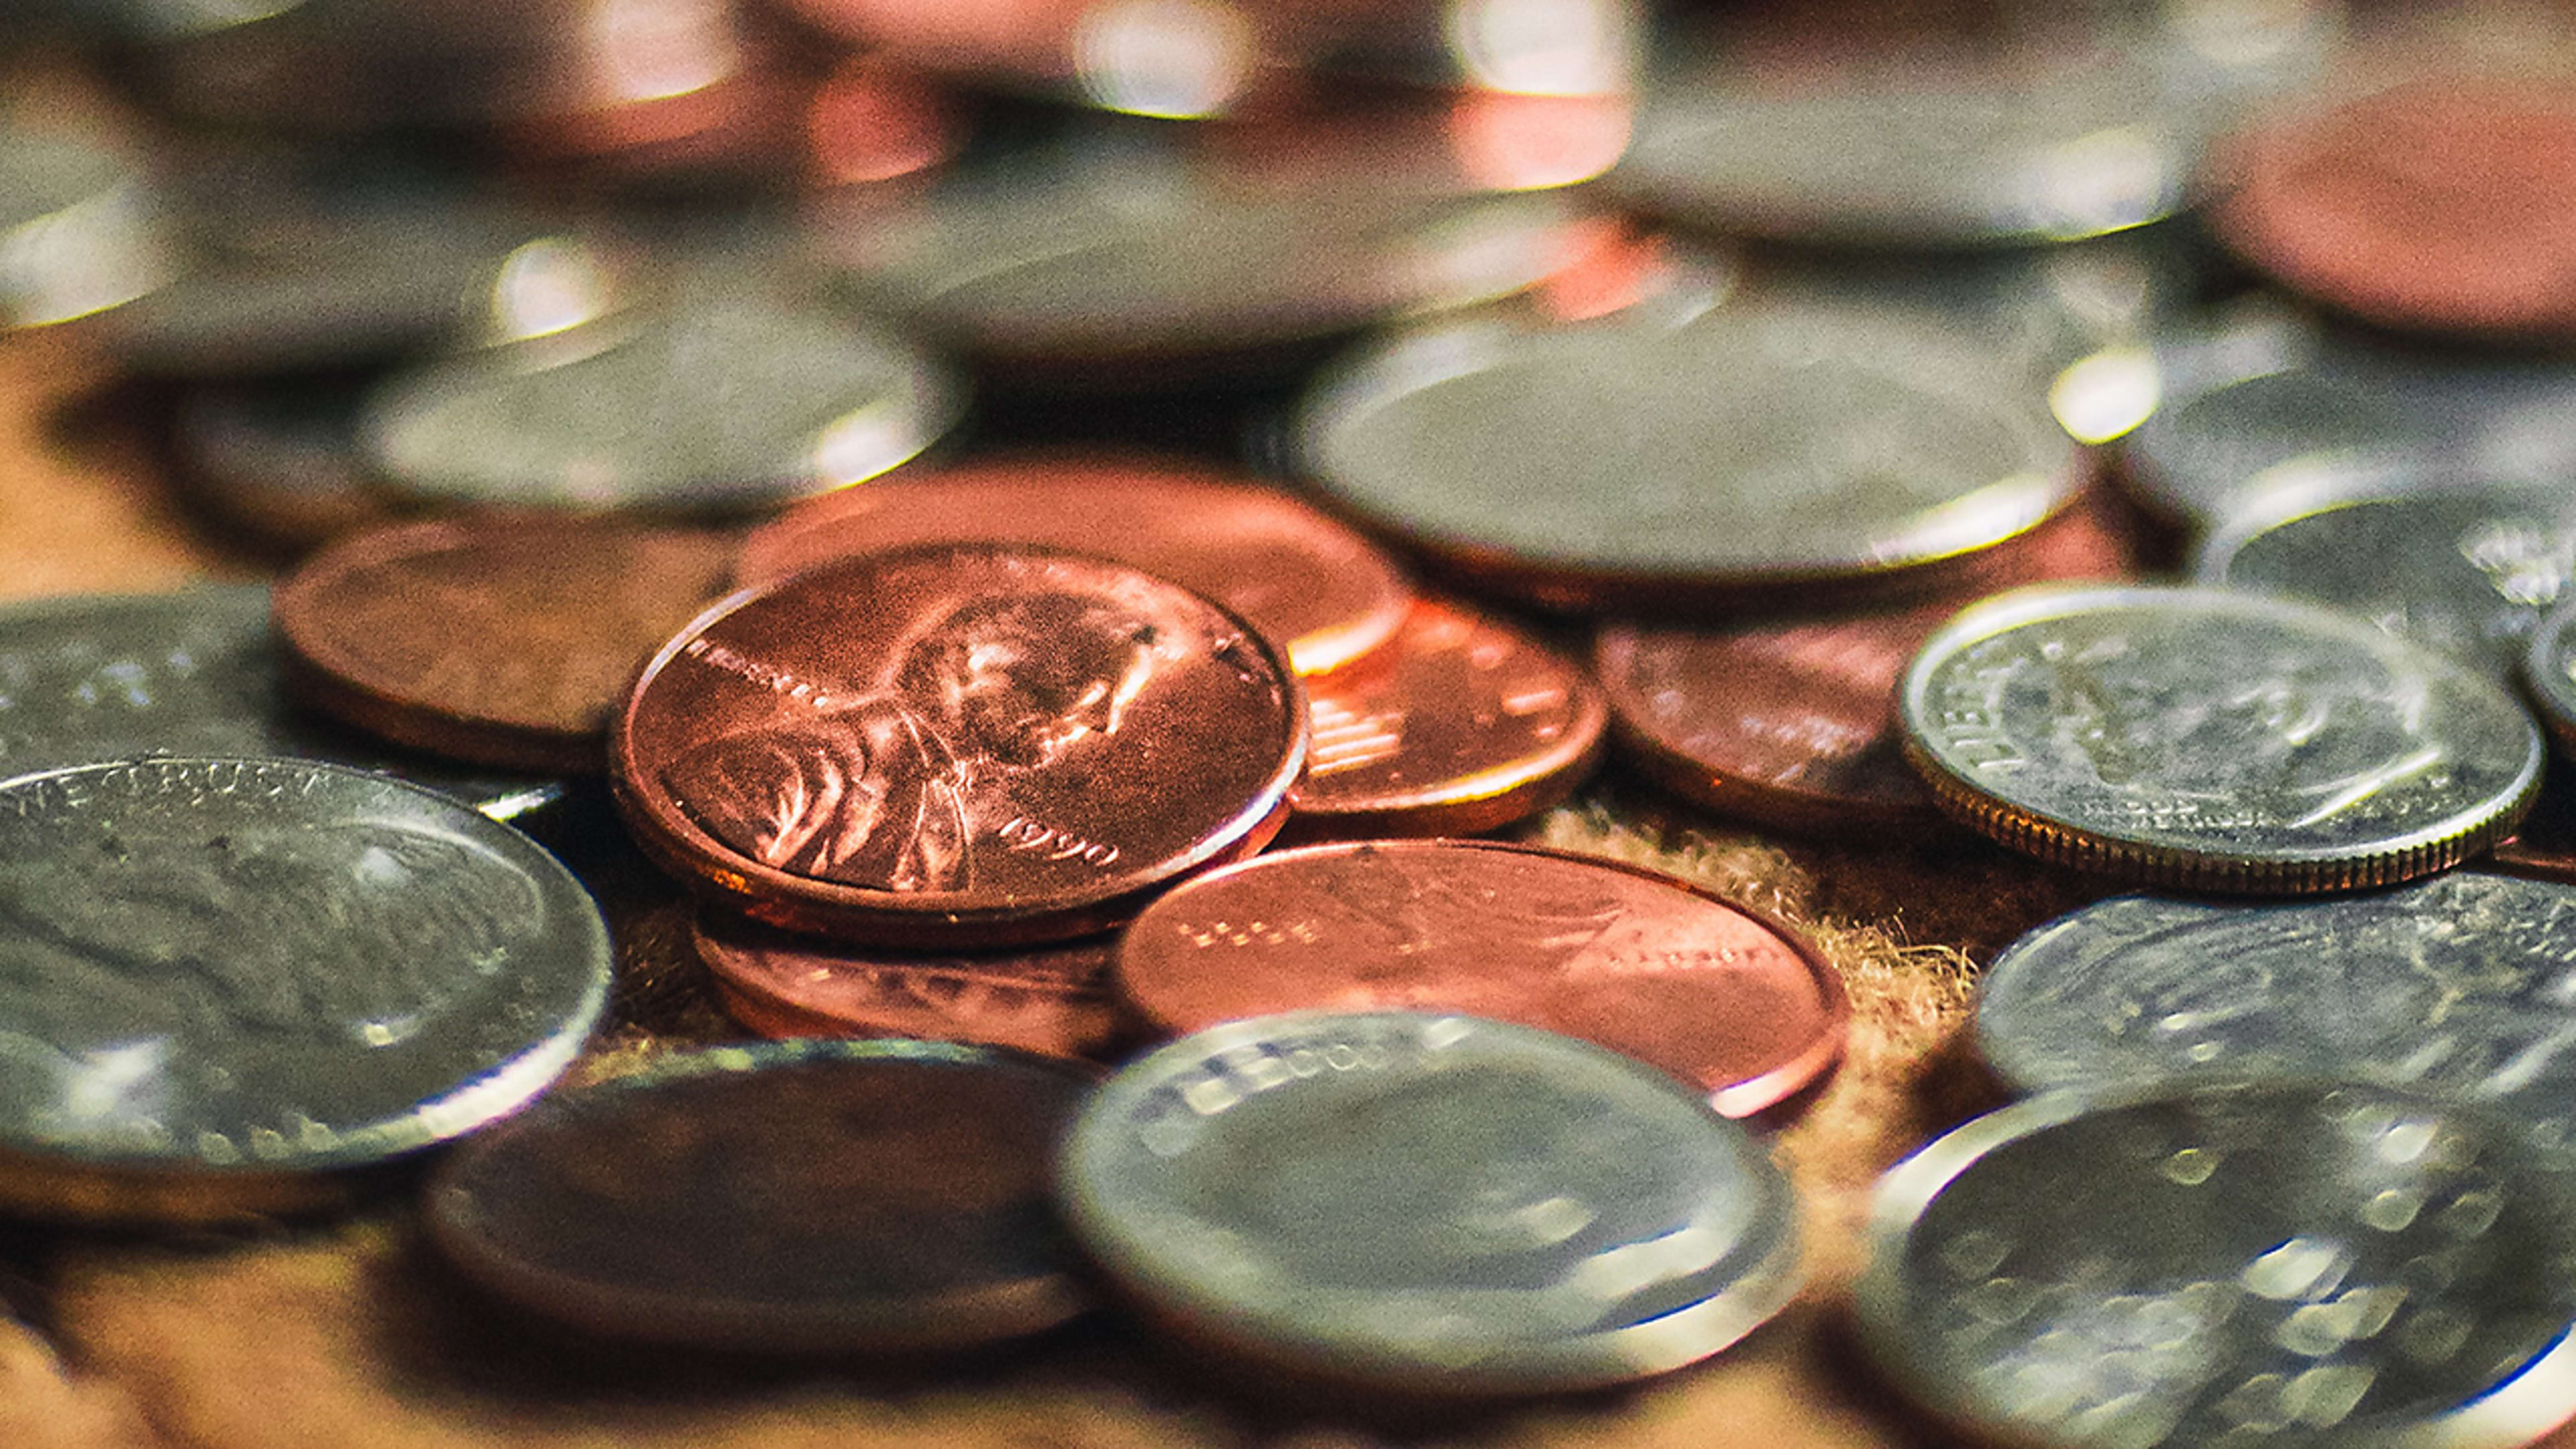 The coin shortage is so bad, banks will now pay you extra for change